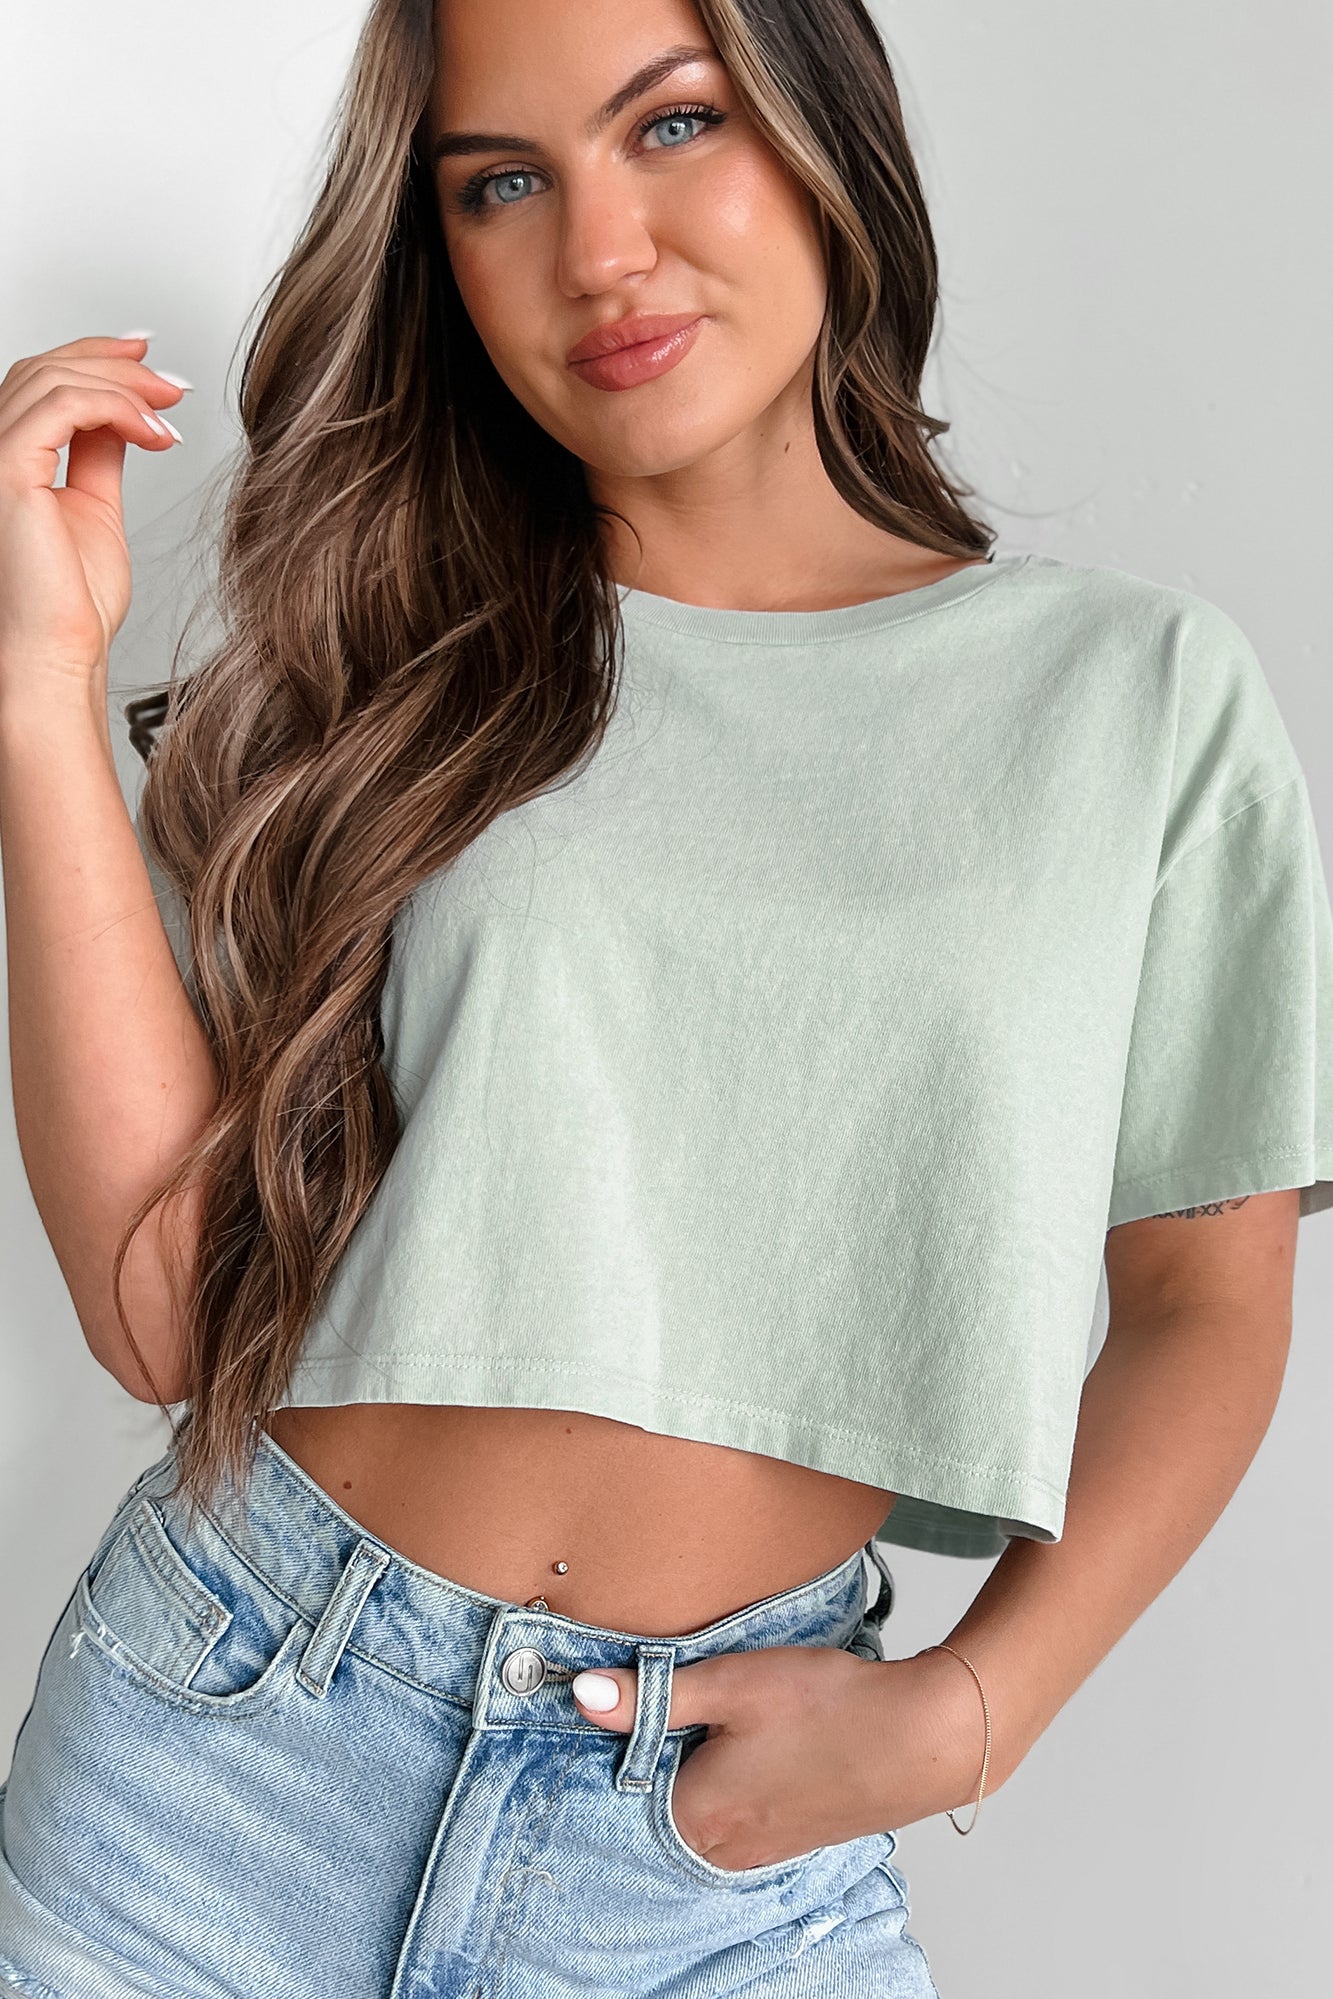 Heather Gray Crop Top - Where I'm From